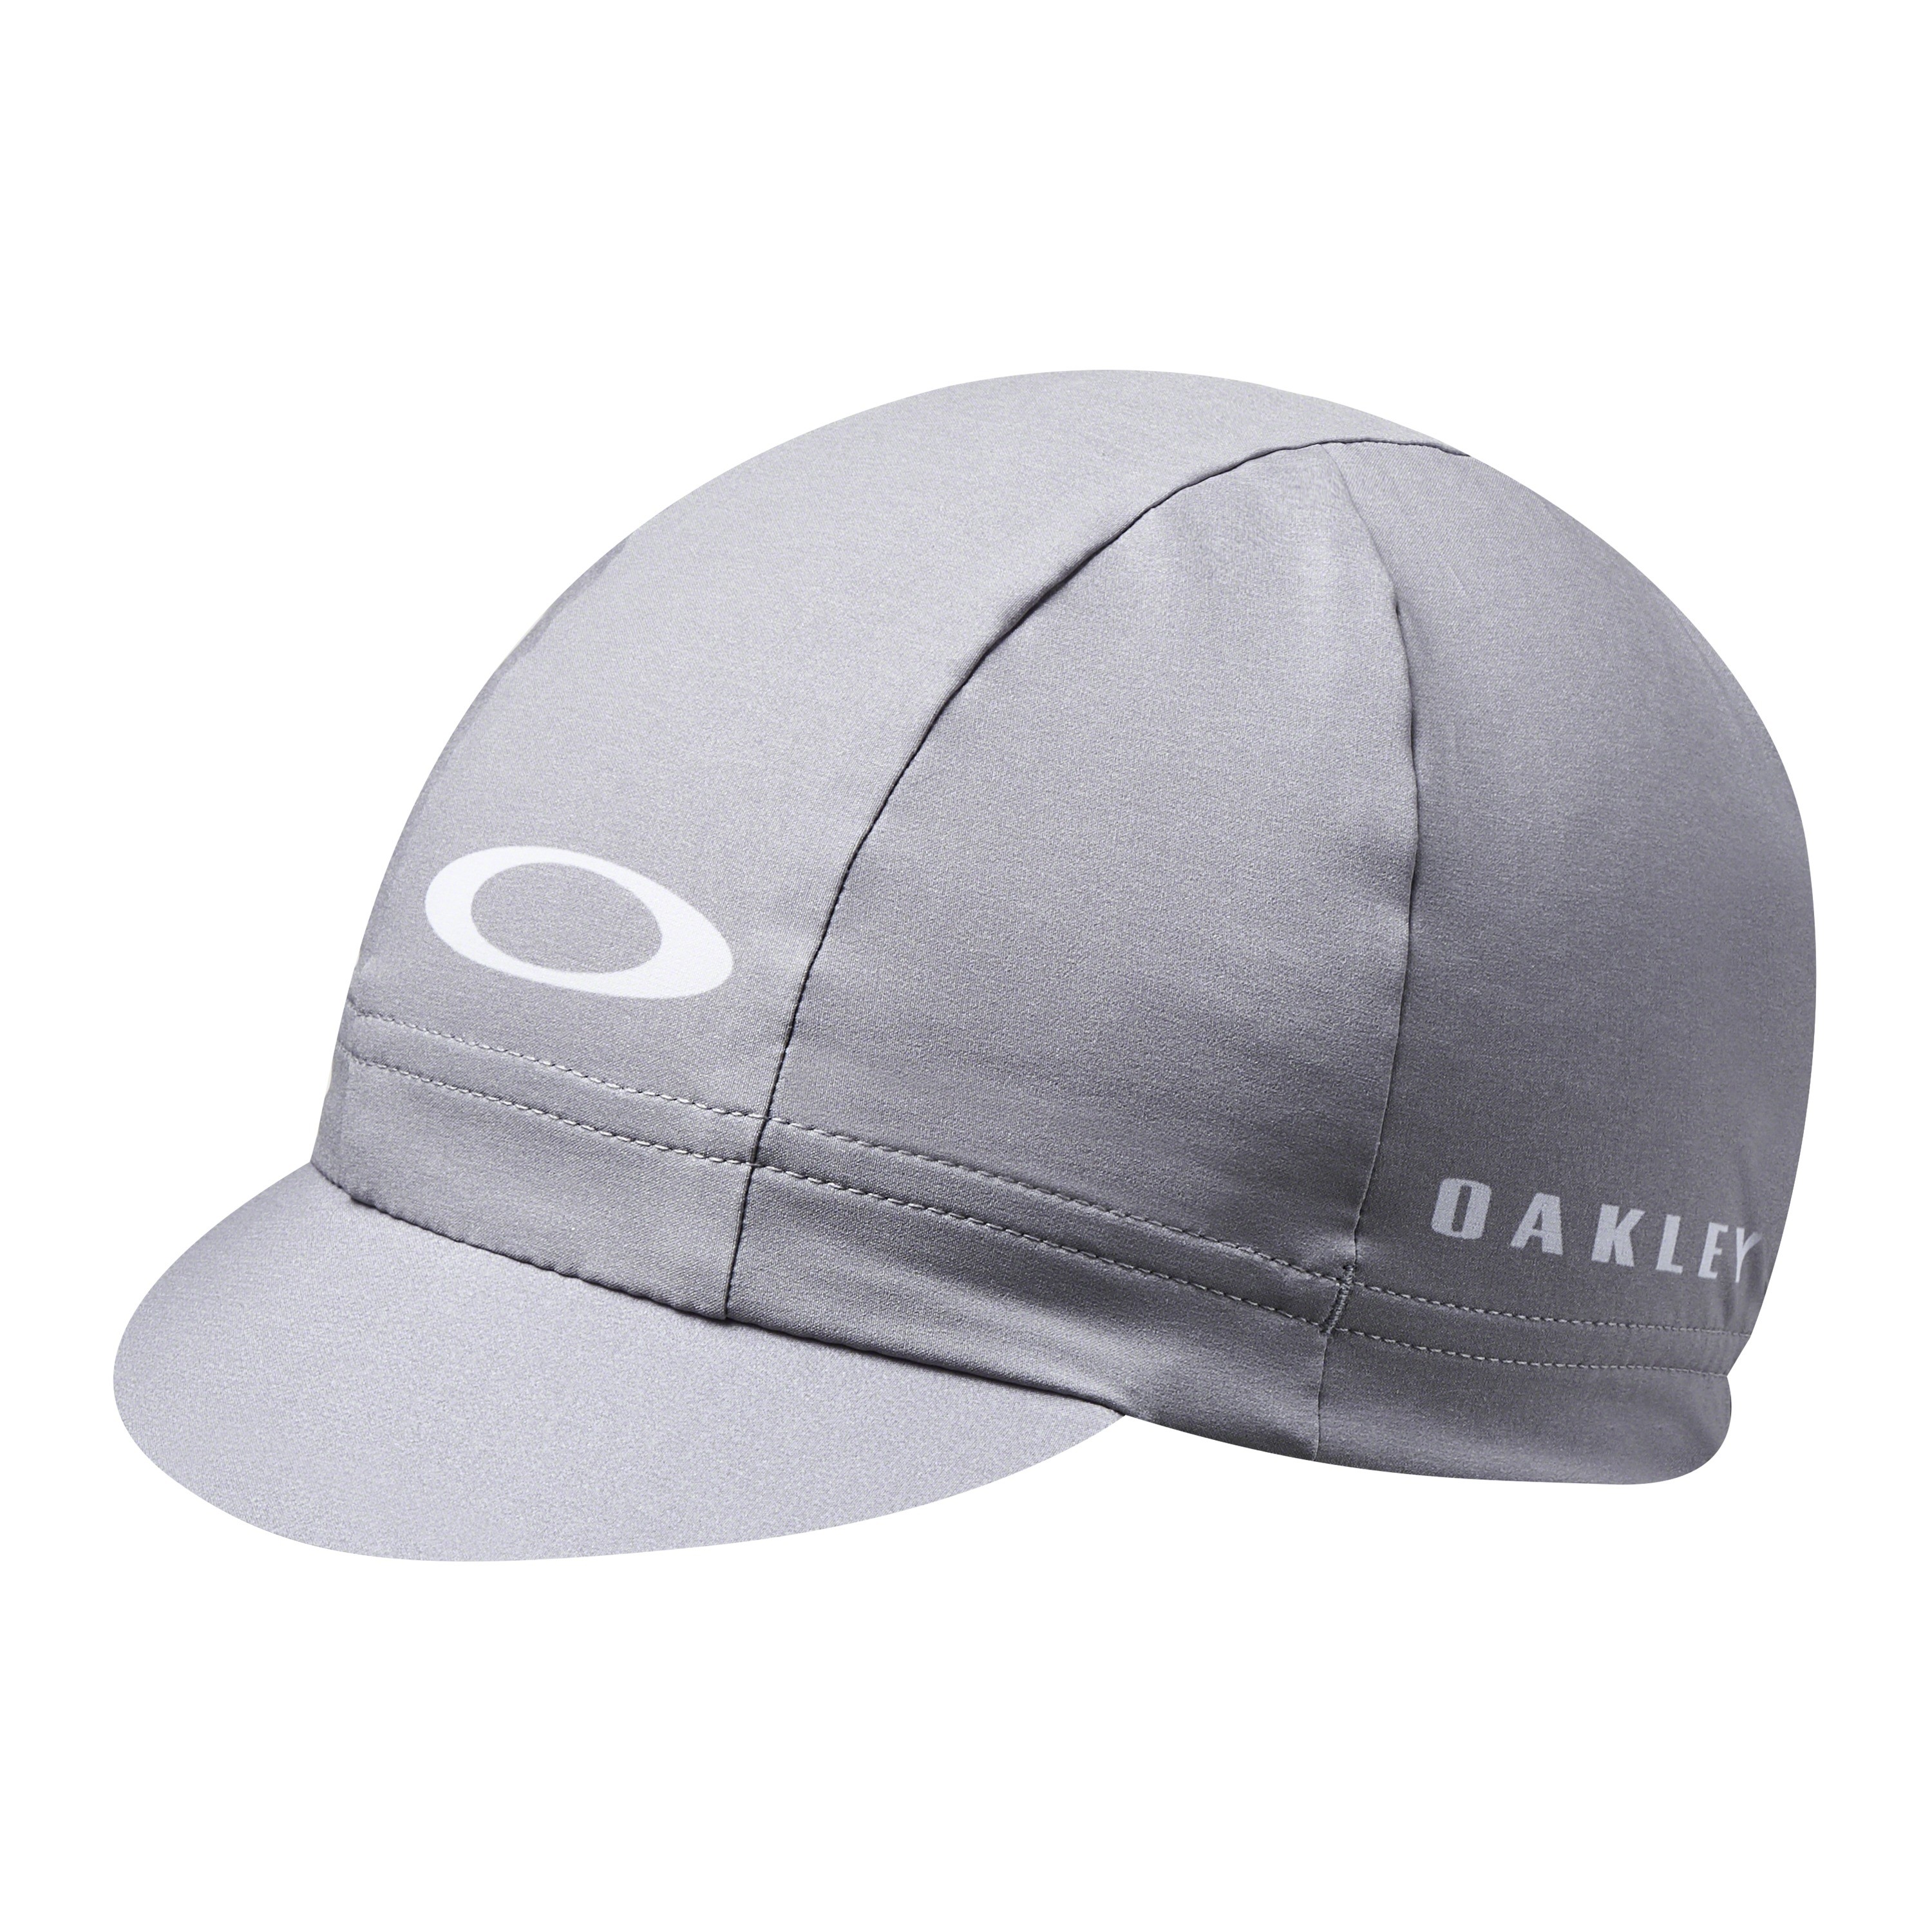 Oakley cycling casquette cycliste cool gris